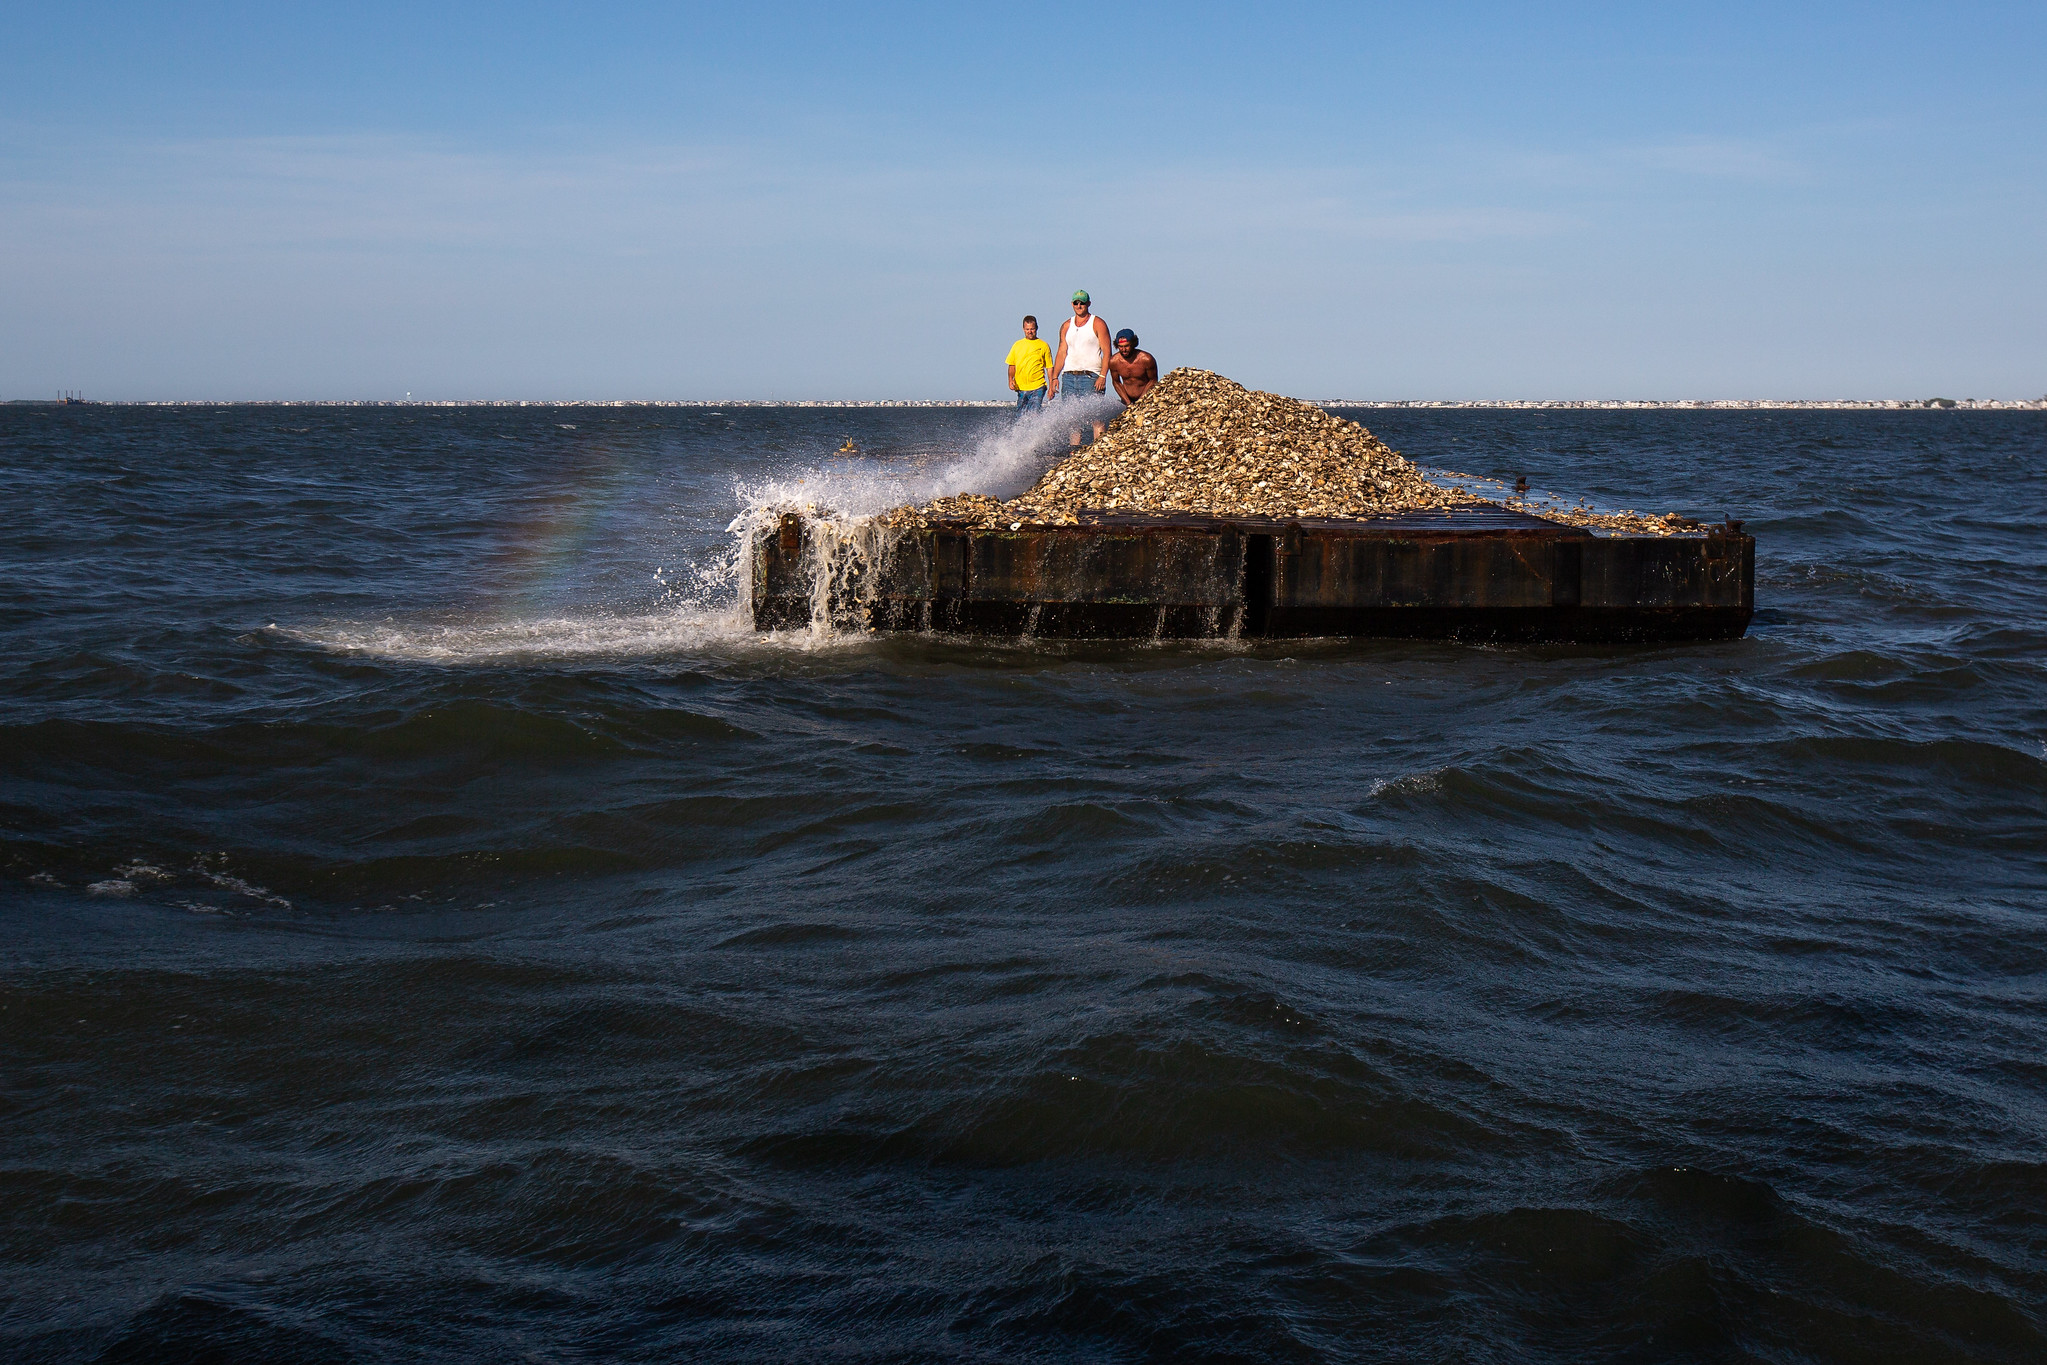 Researchers use water power from a hose to spray shells overboard to plant new oysters at the Tuckerton restoration site in 2020.